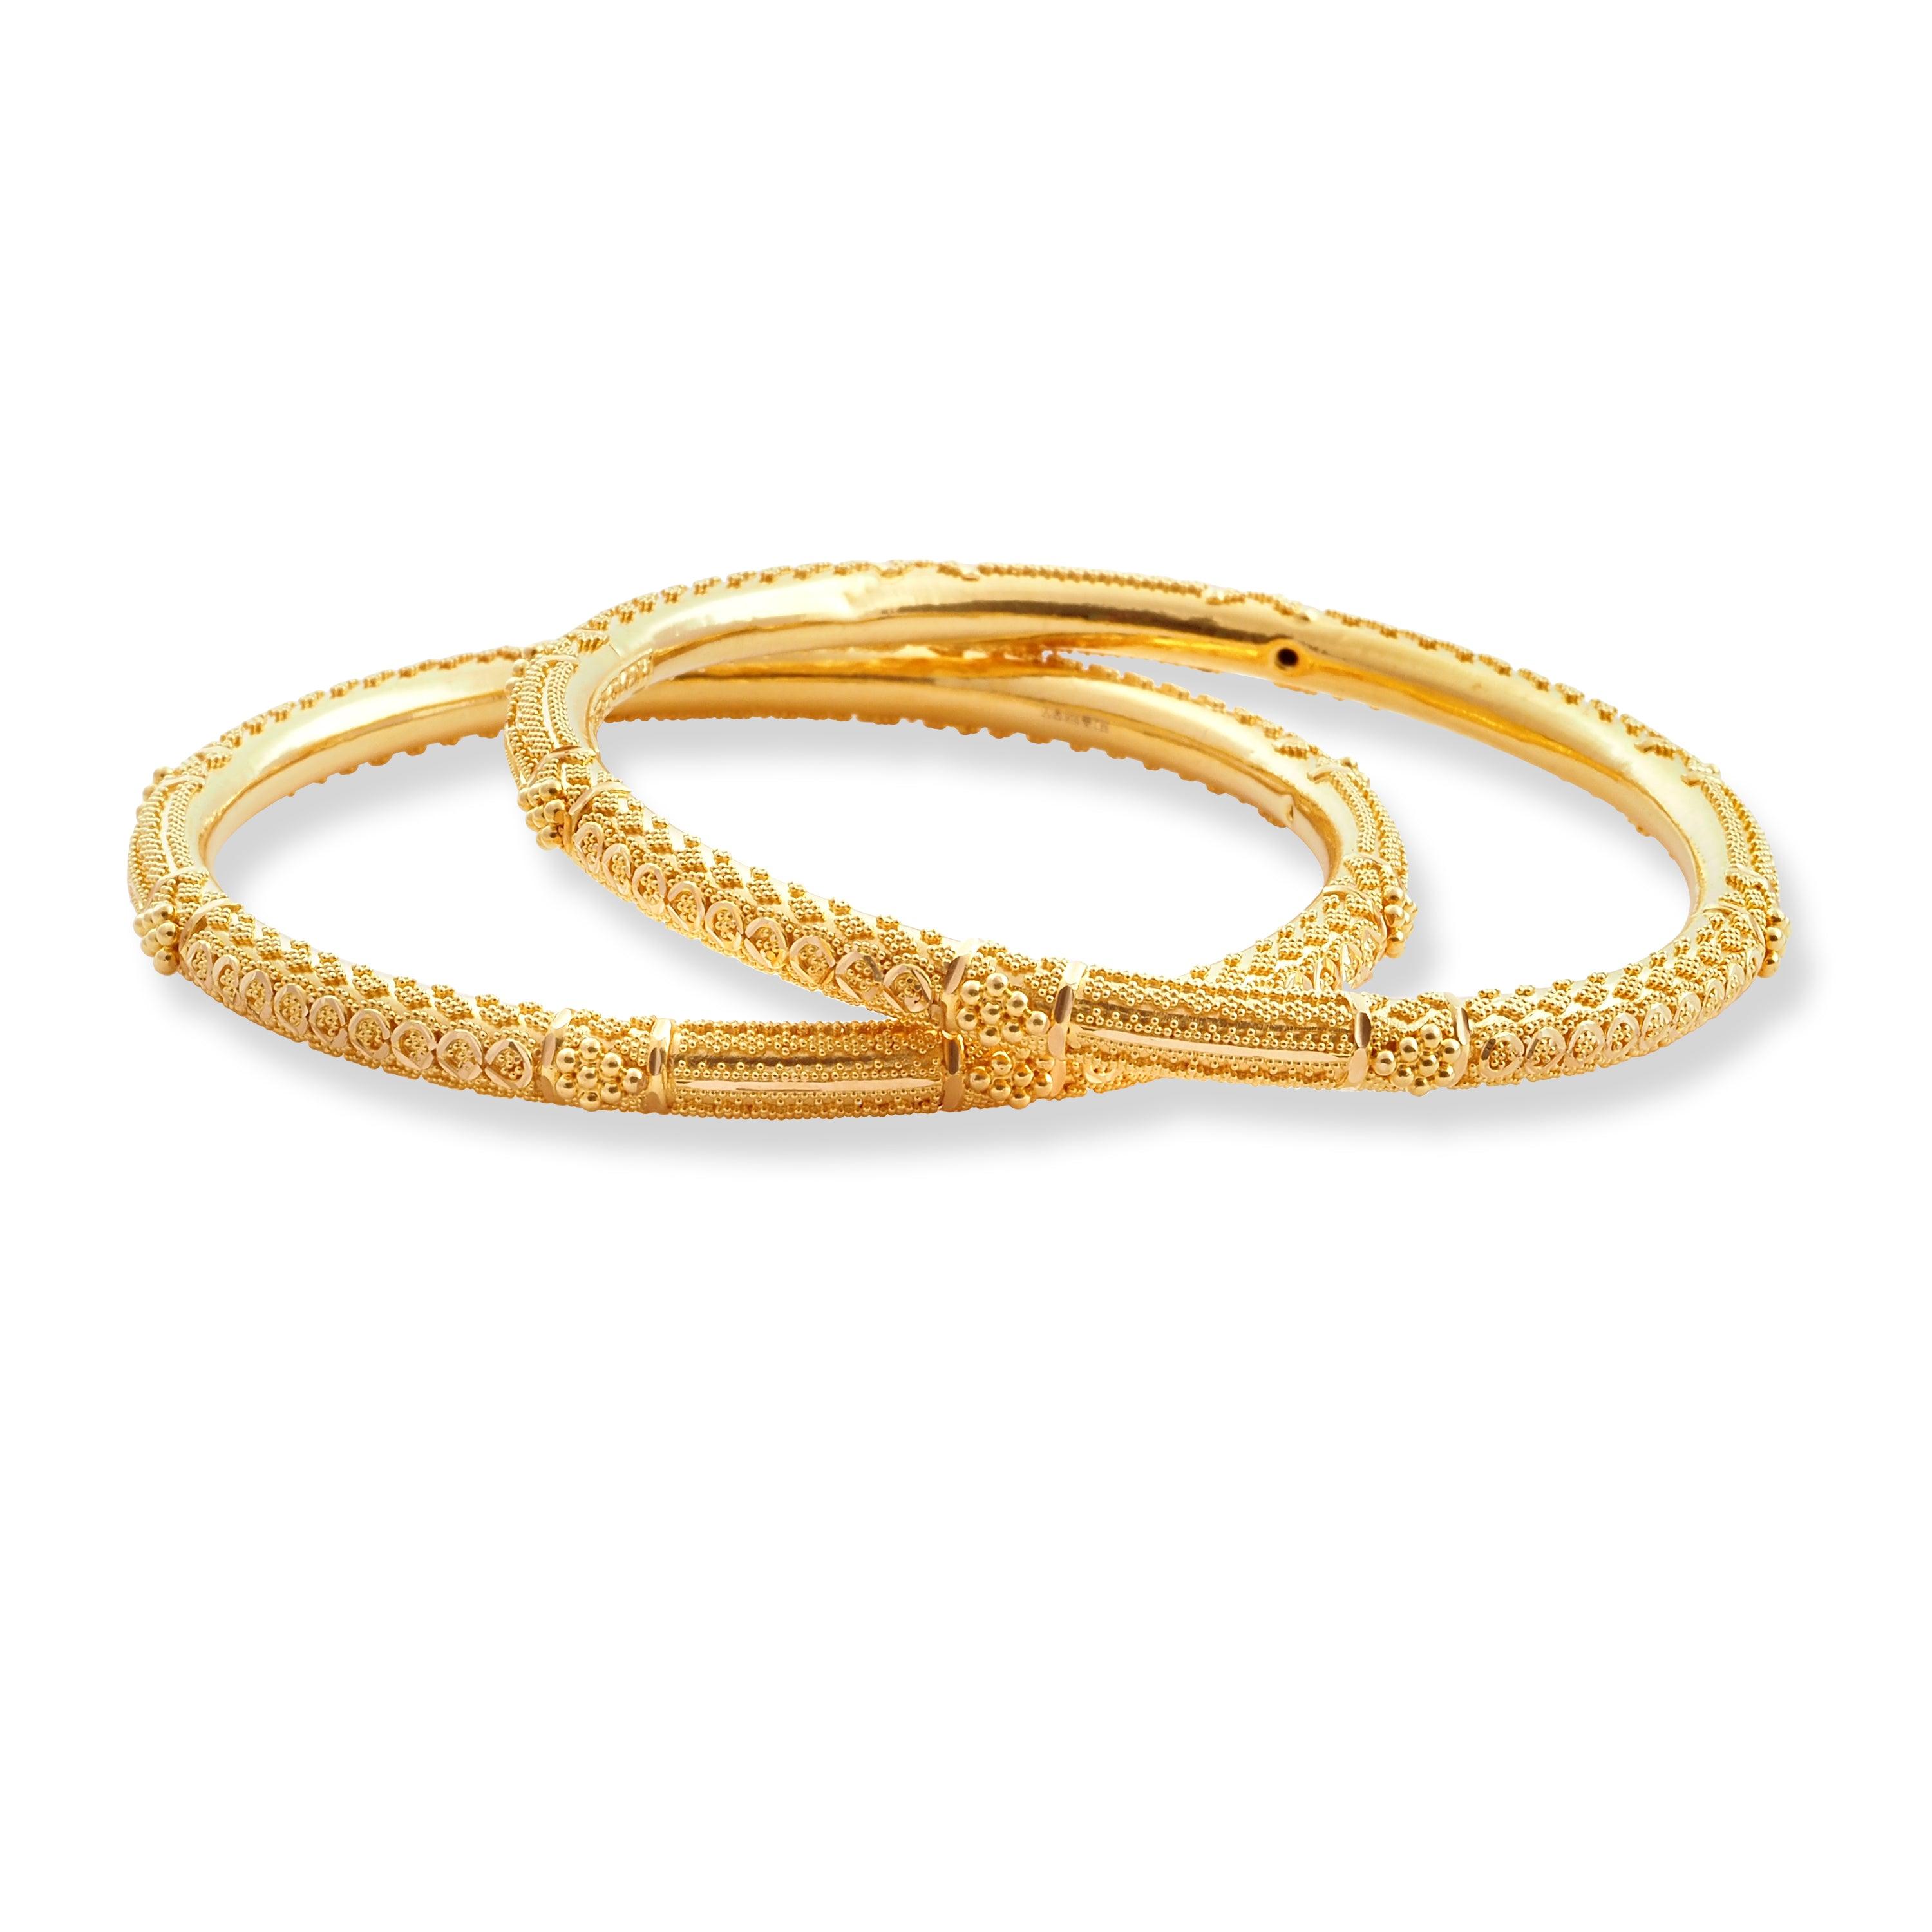 22ct Gold Pair of Hollow Tube Bangles with Filigree Work & Comfort fit Finish B-8586 - Minar Jewellers